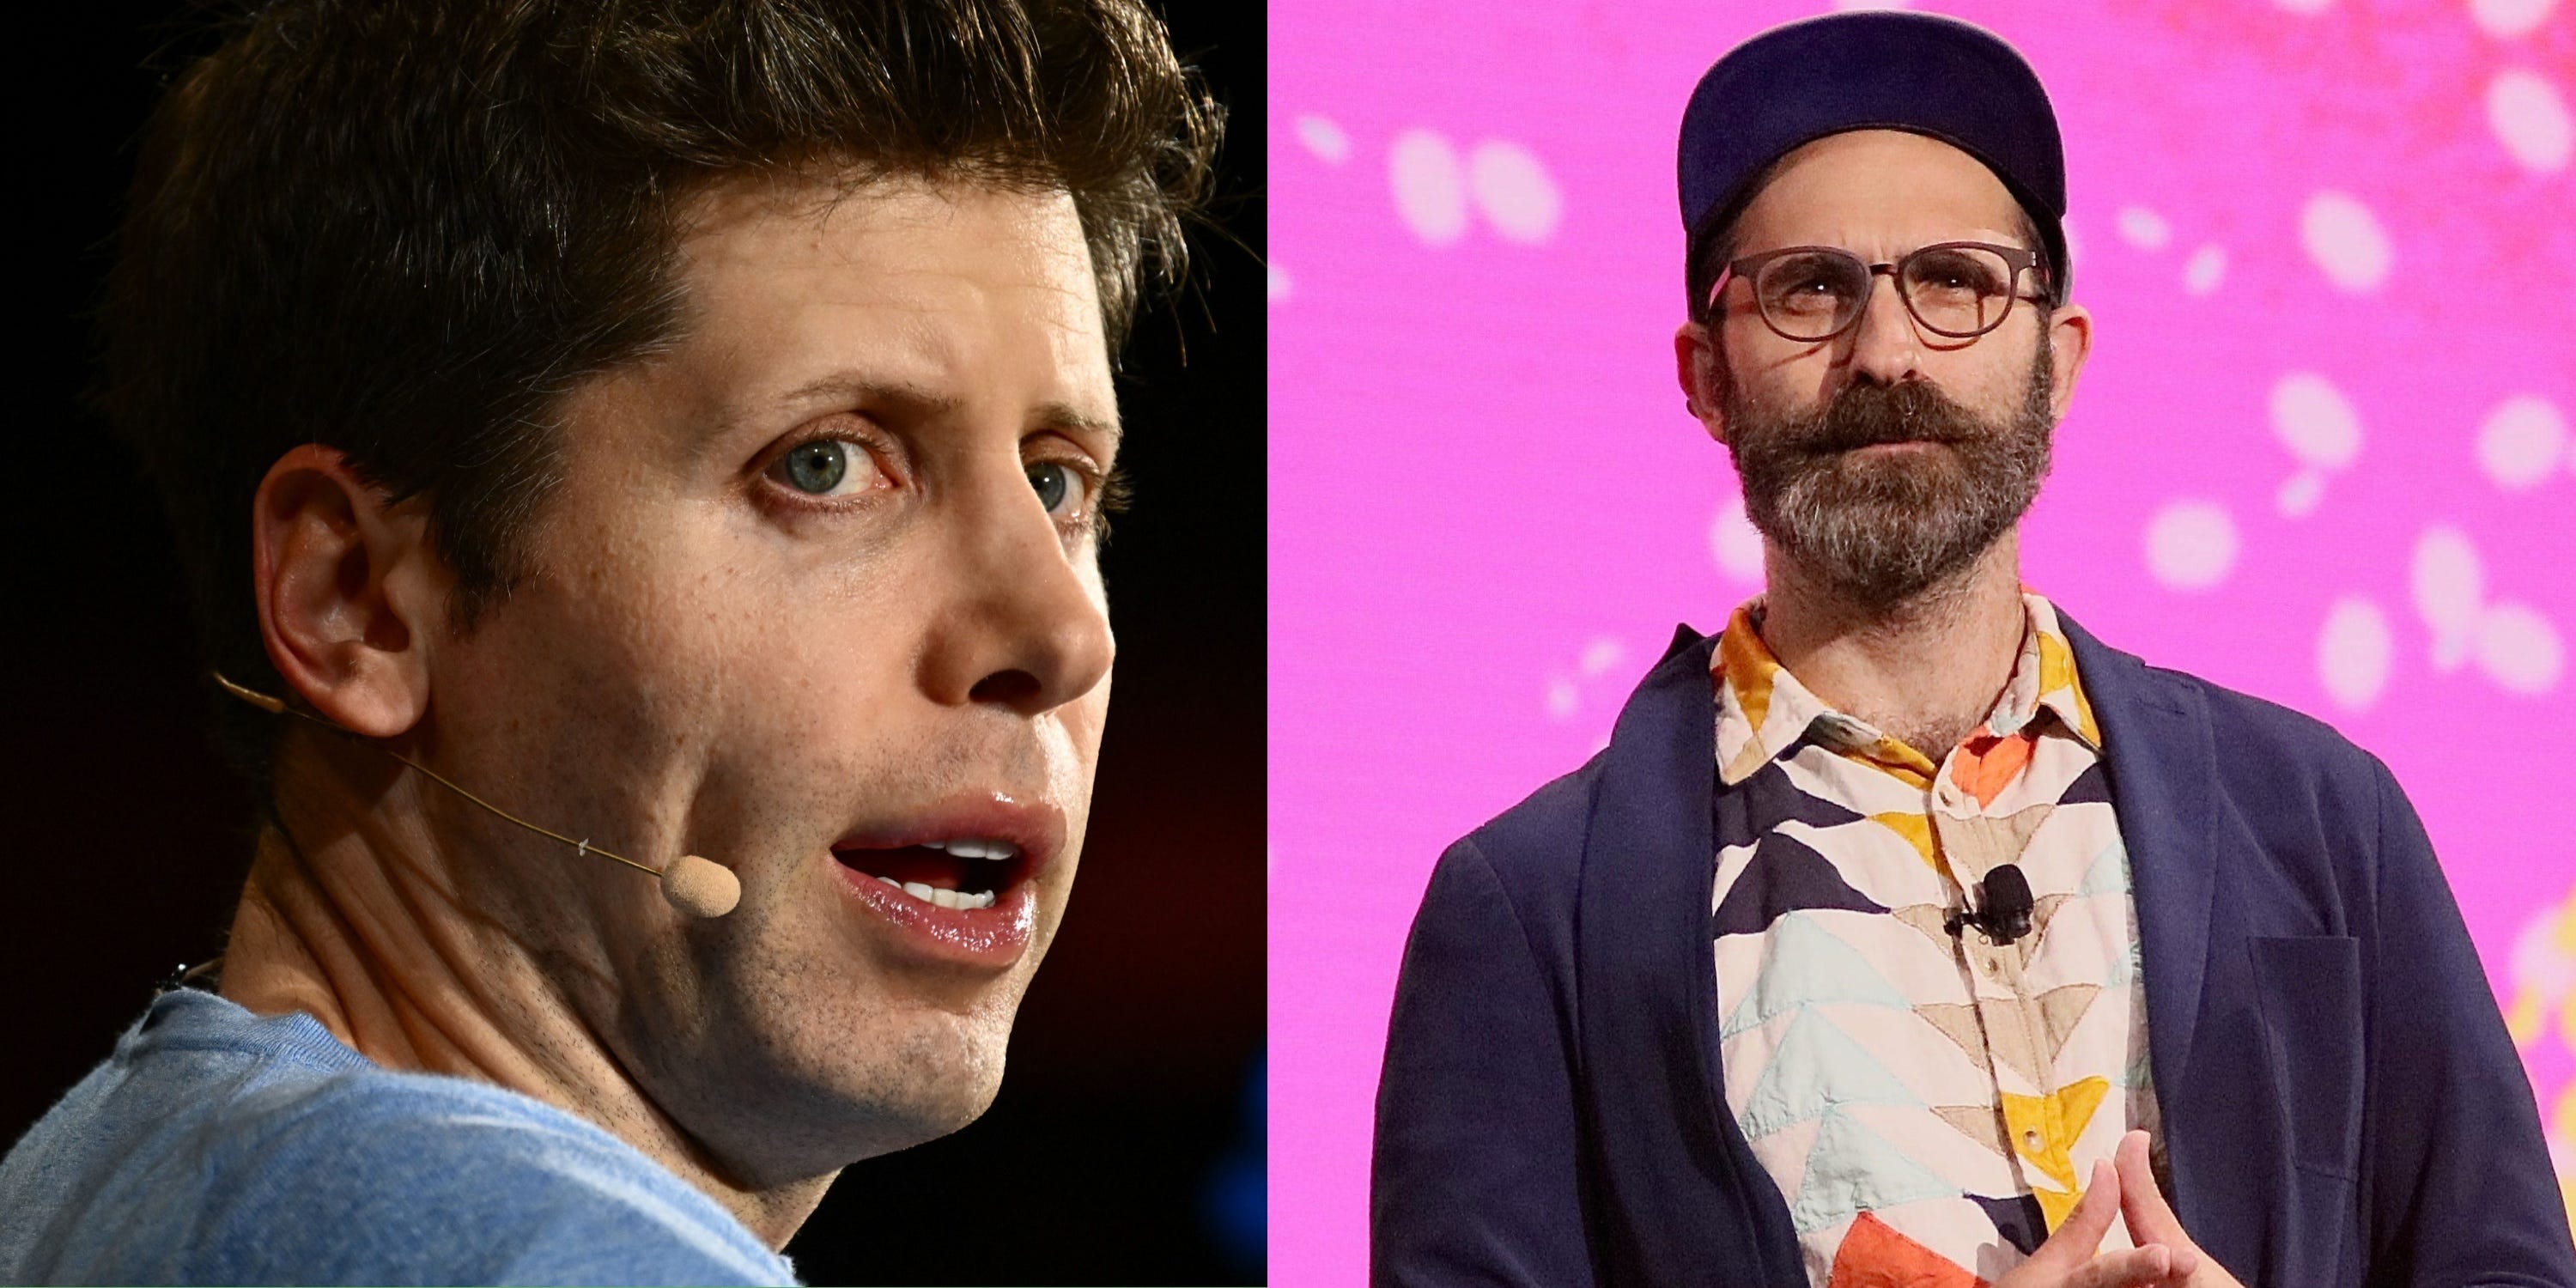 microsoft, openai's interim ceo once described meeting sam altman and immediately recognizing his business superpower